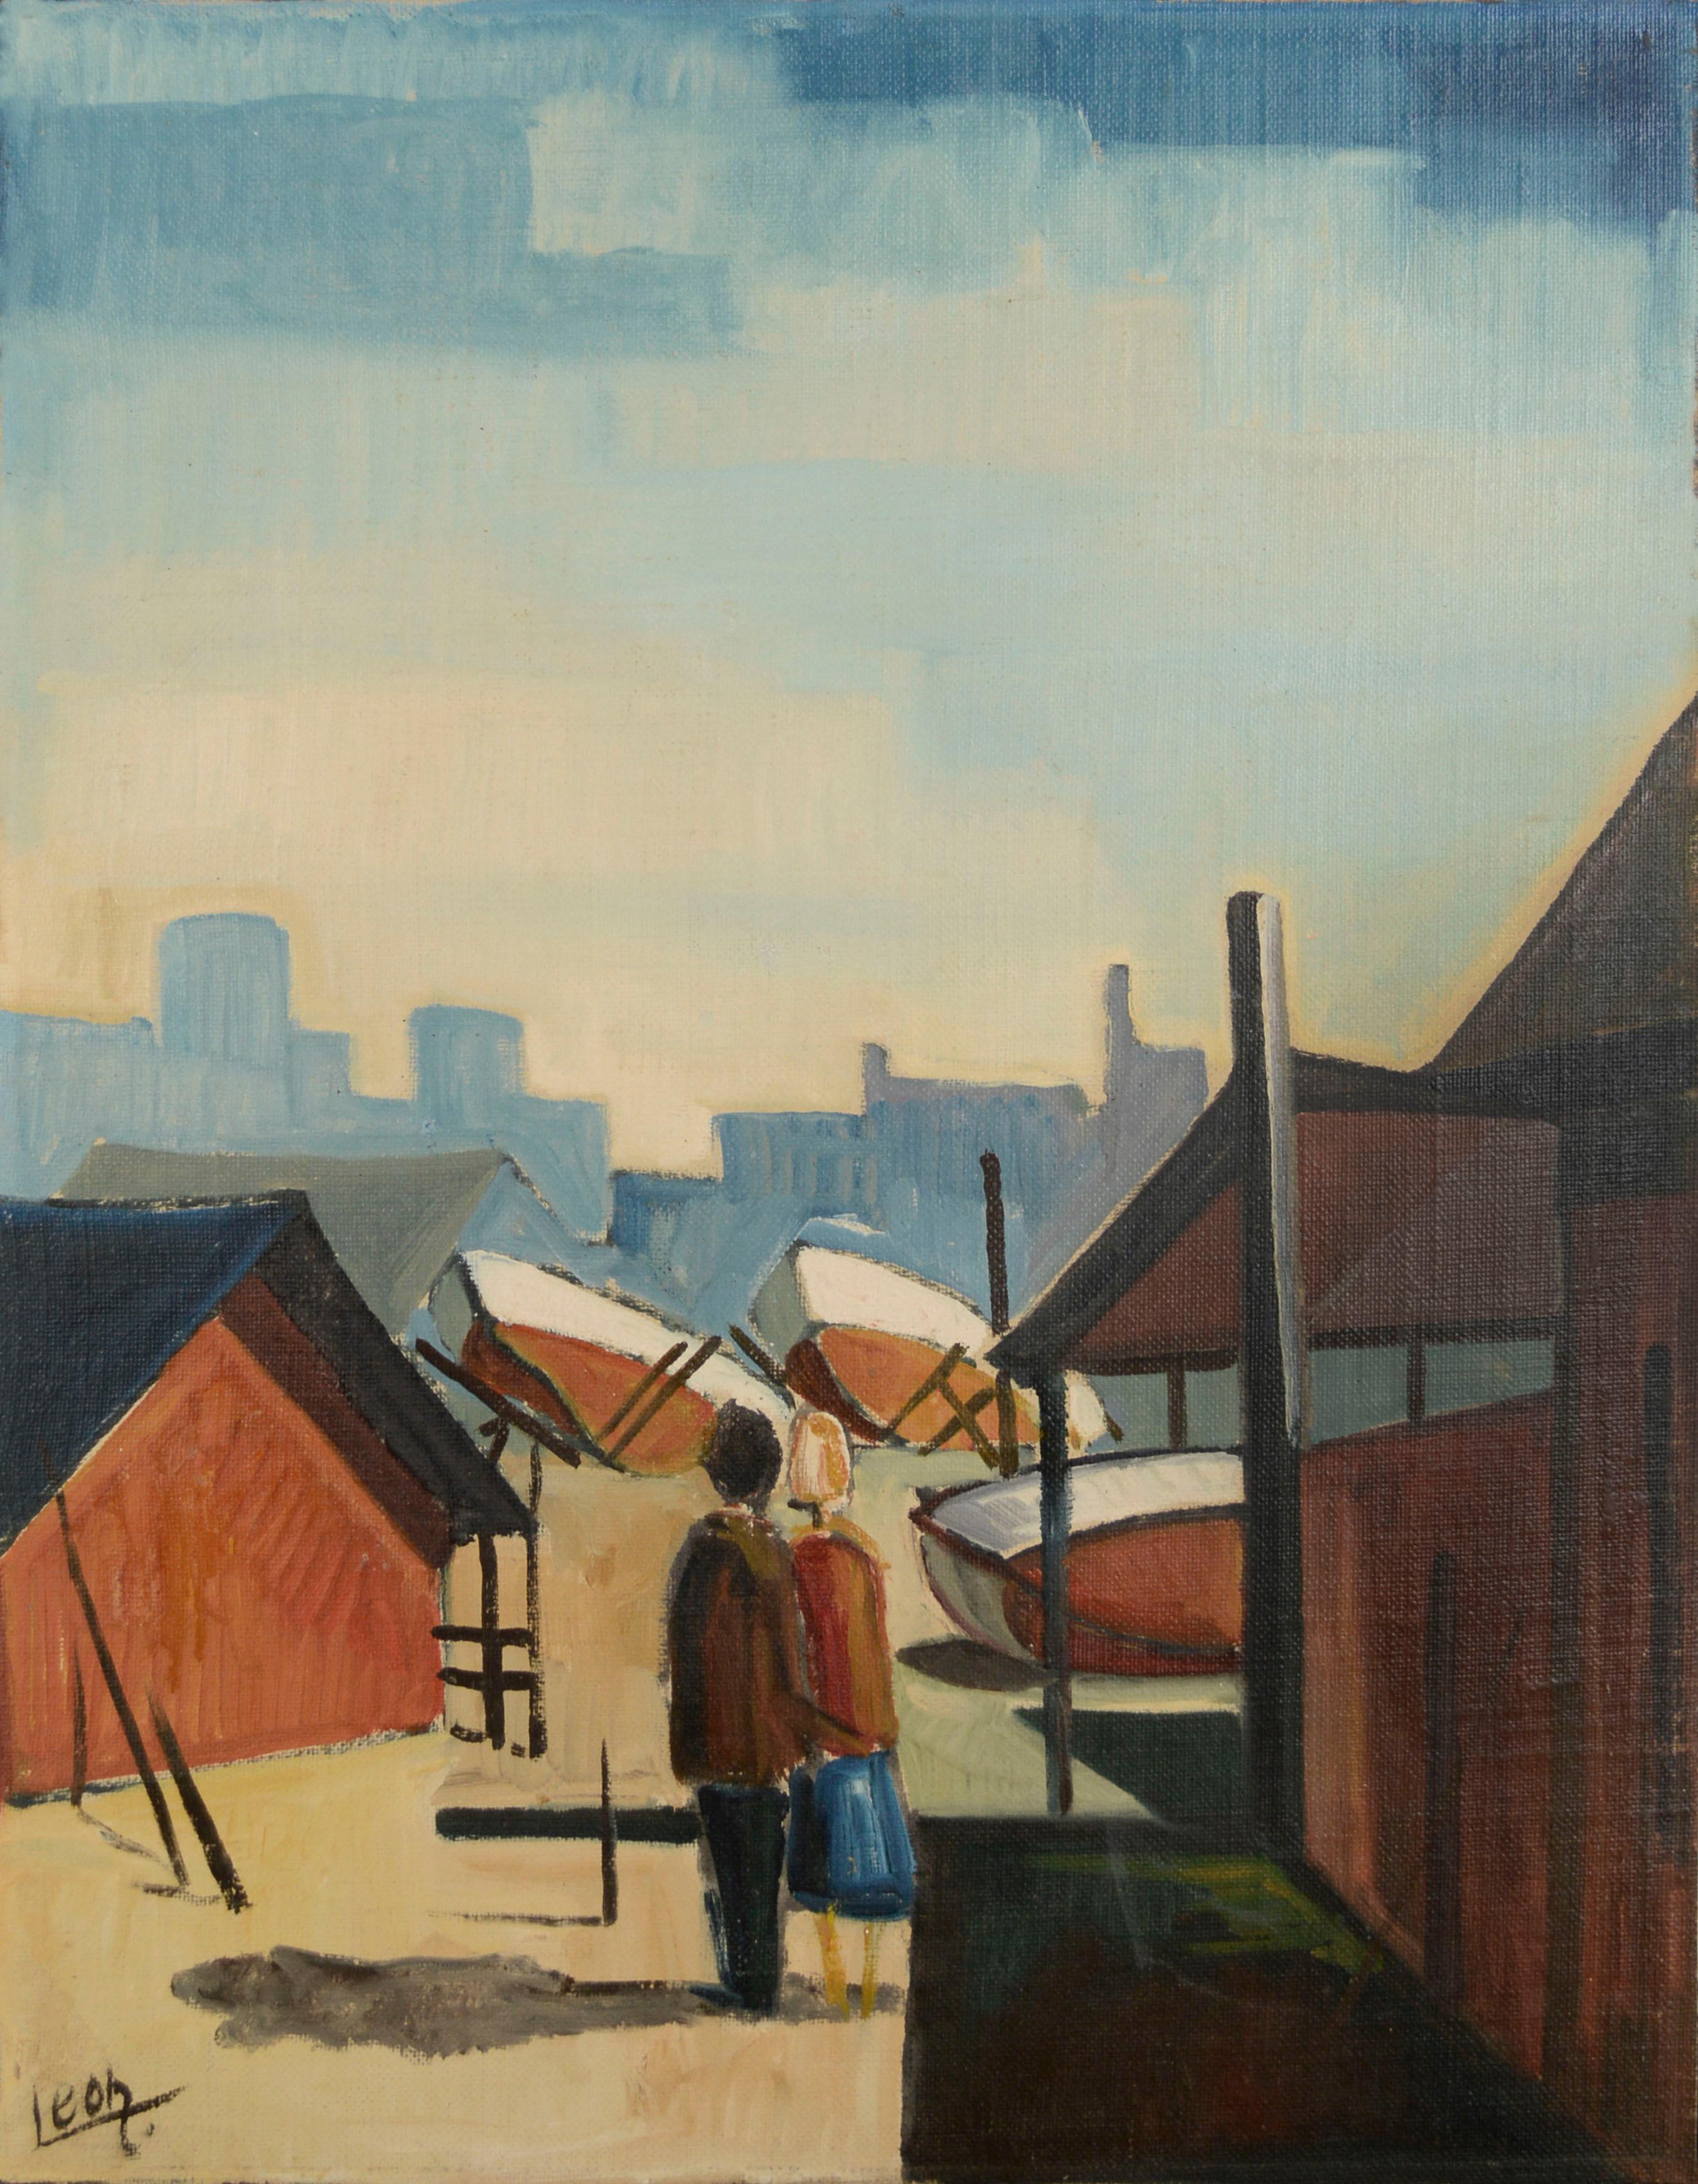 Couple at the Harbor, Mid Century Modern Figurative Cityscape with Boats 